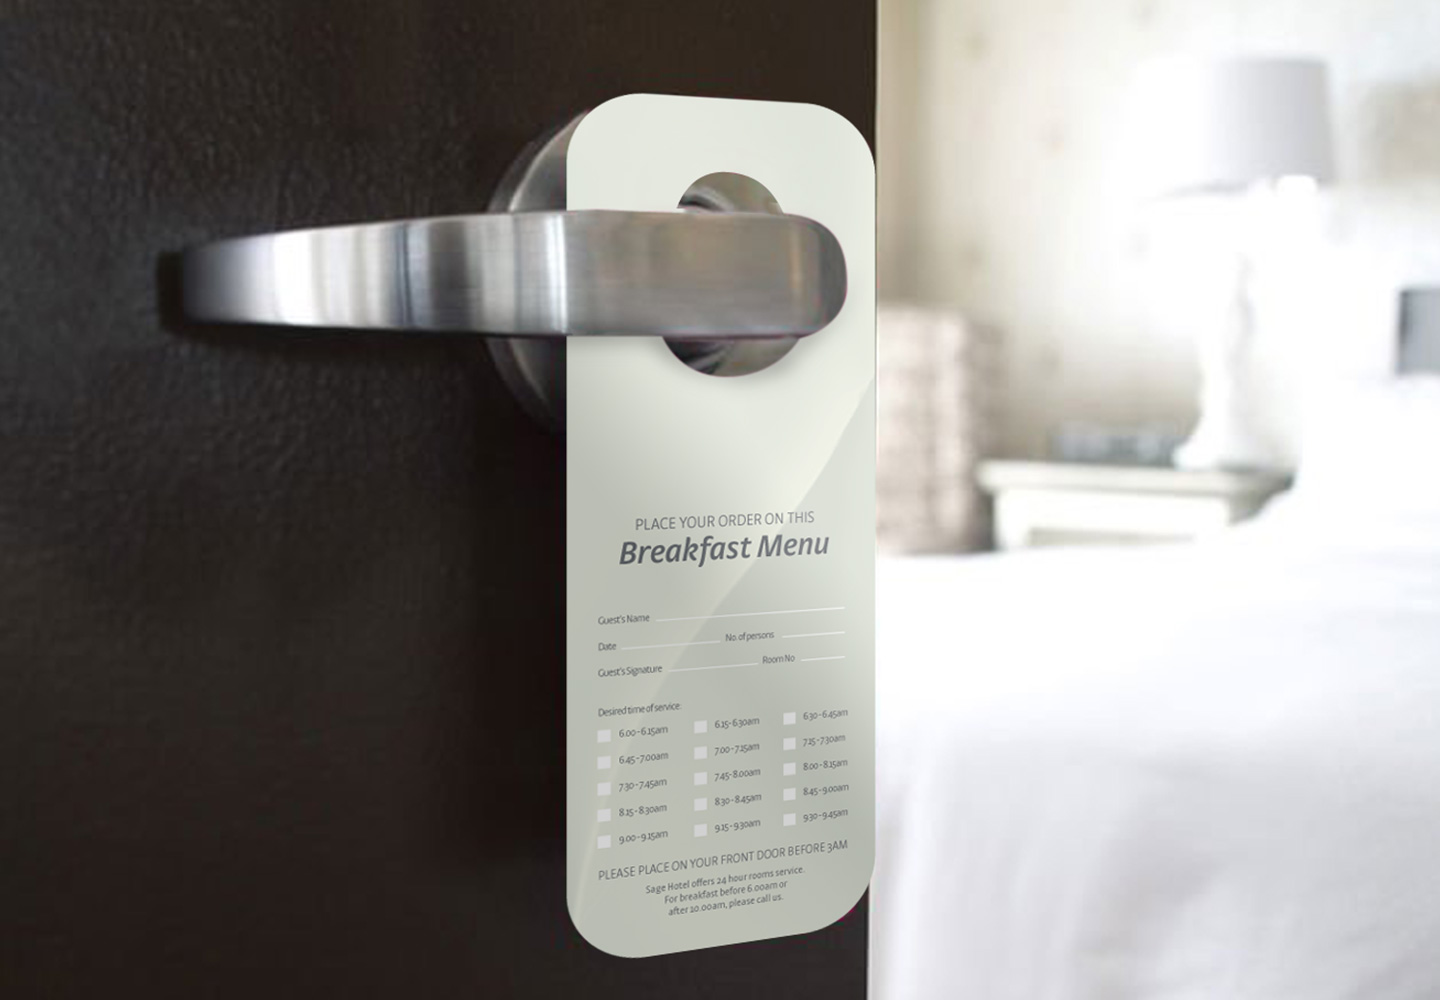 Brand Consultancy in Hospitality Industry. Hotel door signs for Sage Hotels.